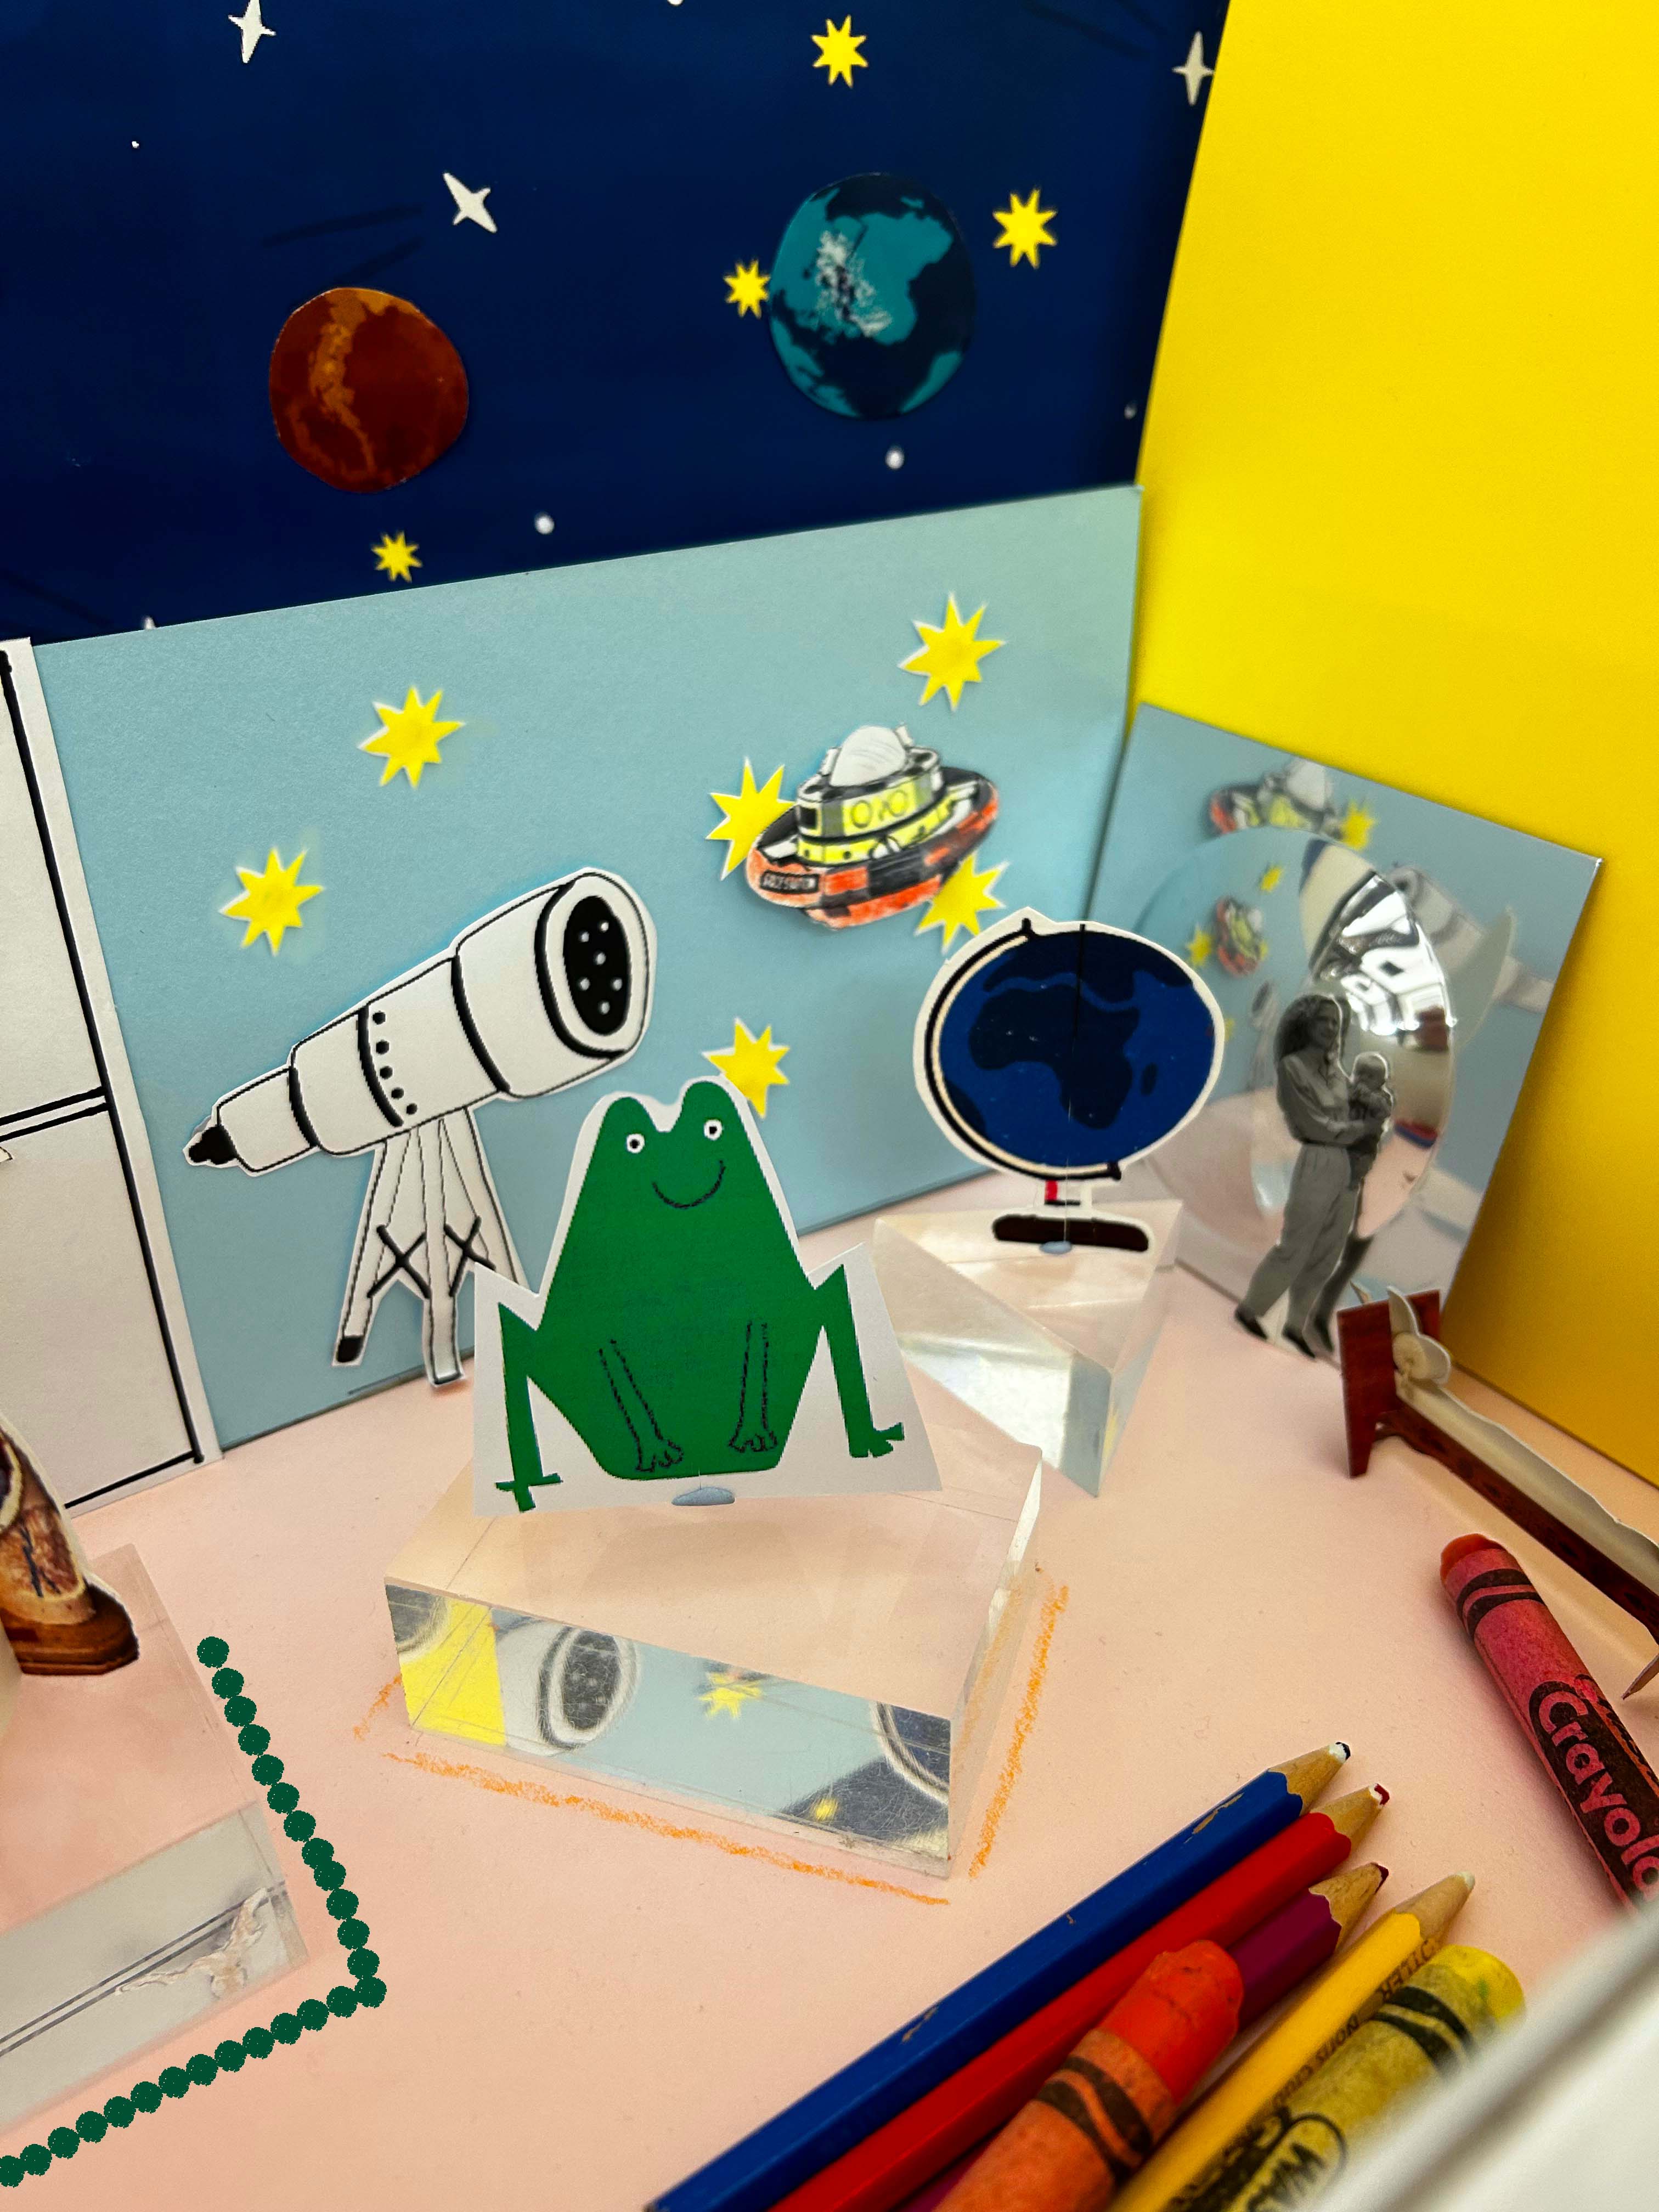 Build your own museum activity. Including a shoe box imitating a museum setting, with a model frog, space scene and craft materials. 